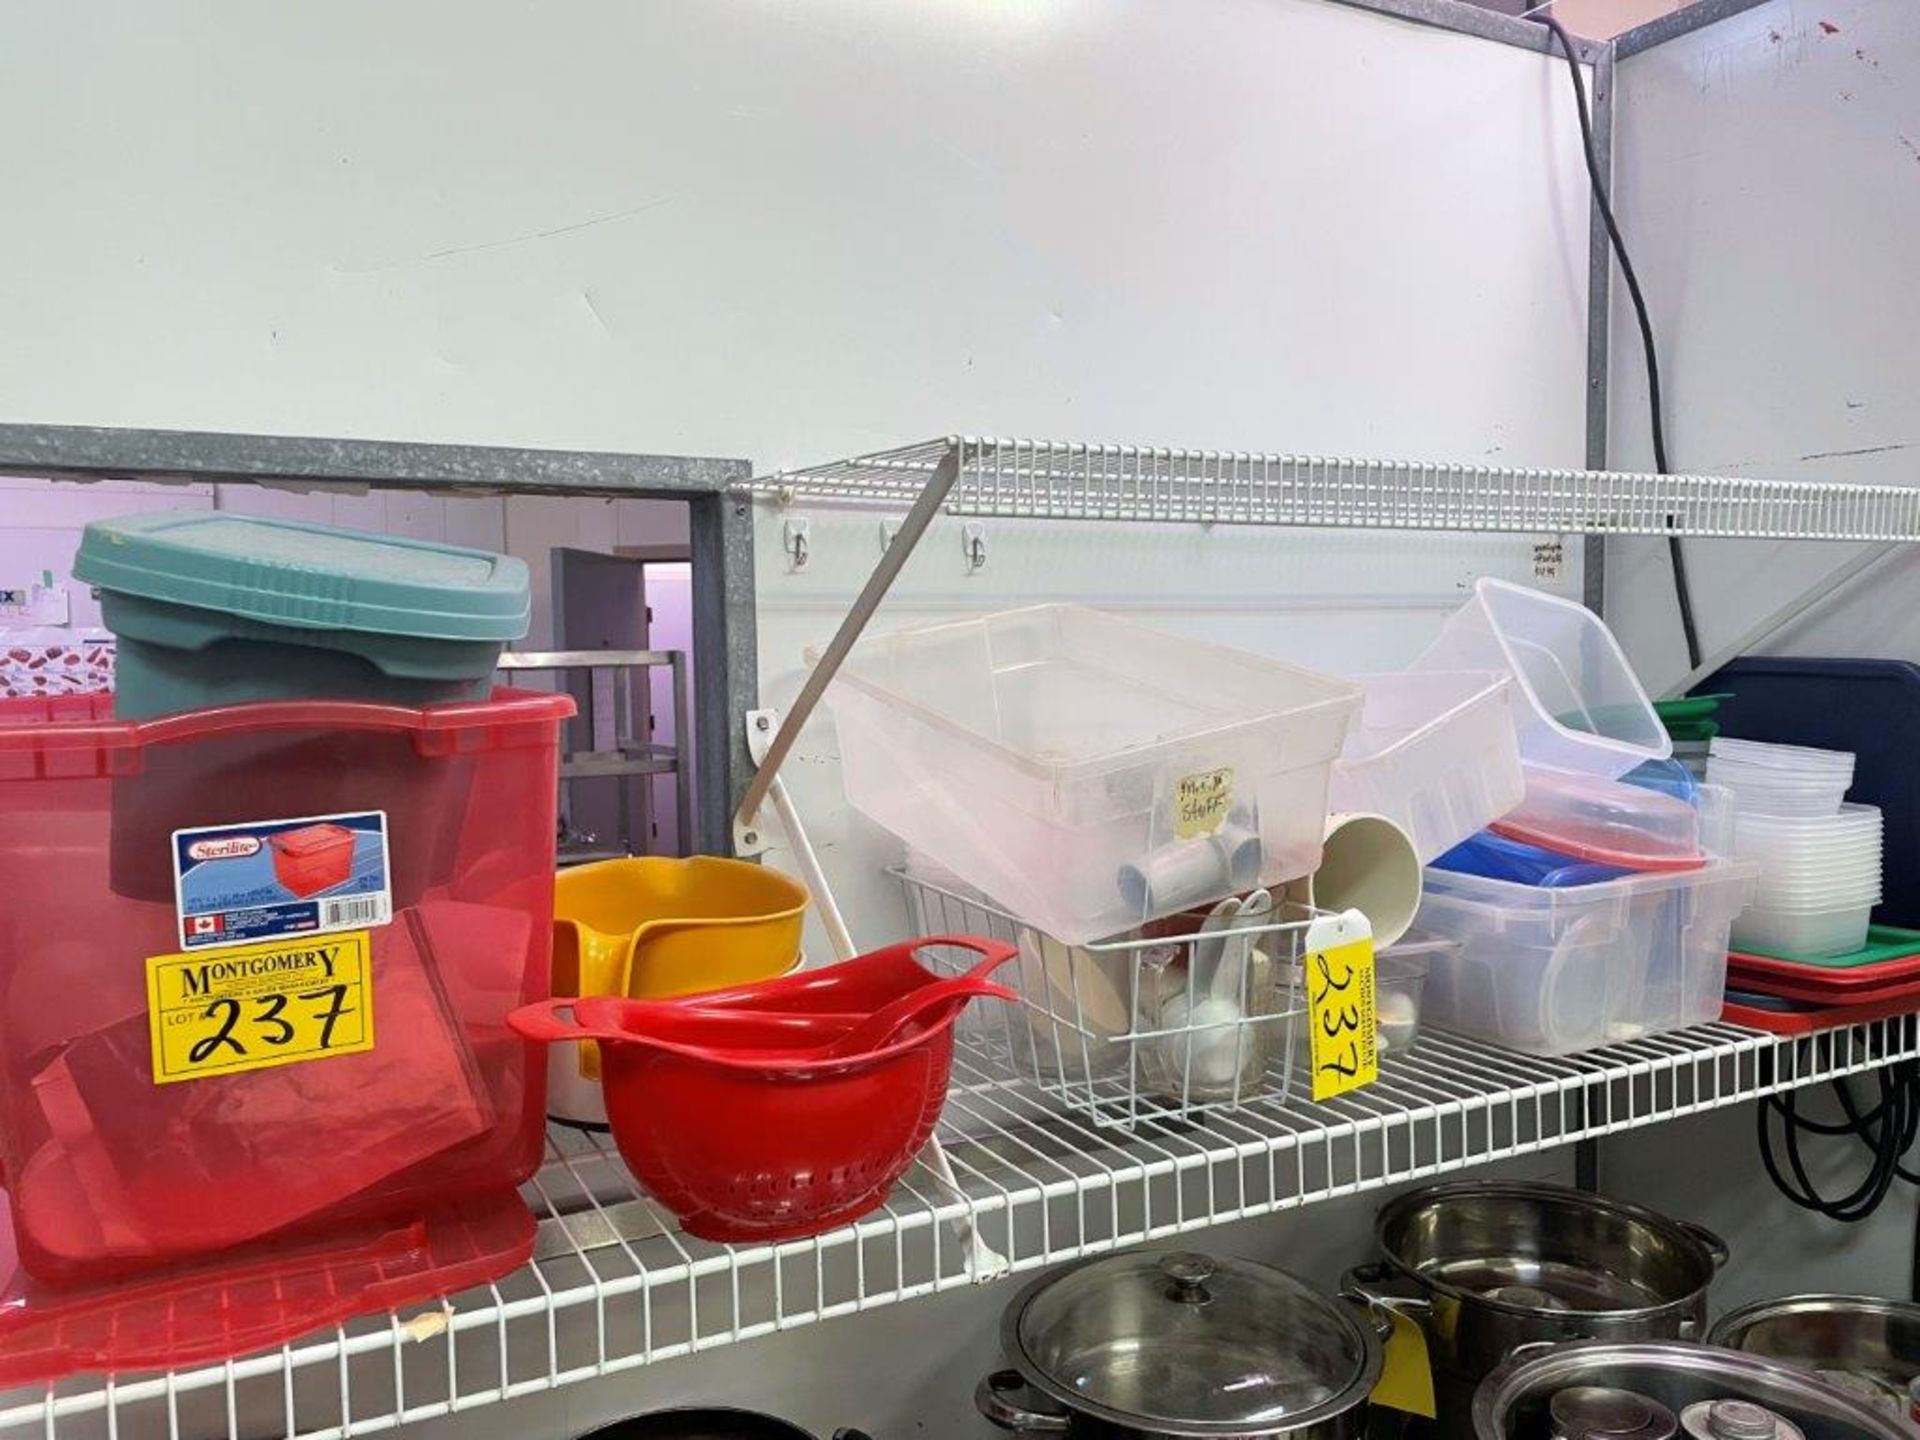 L/O ASSORTED PLASTIC CONTAINERS, BOWLS, MEASURING CUPS, ETC.